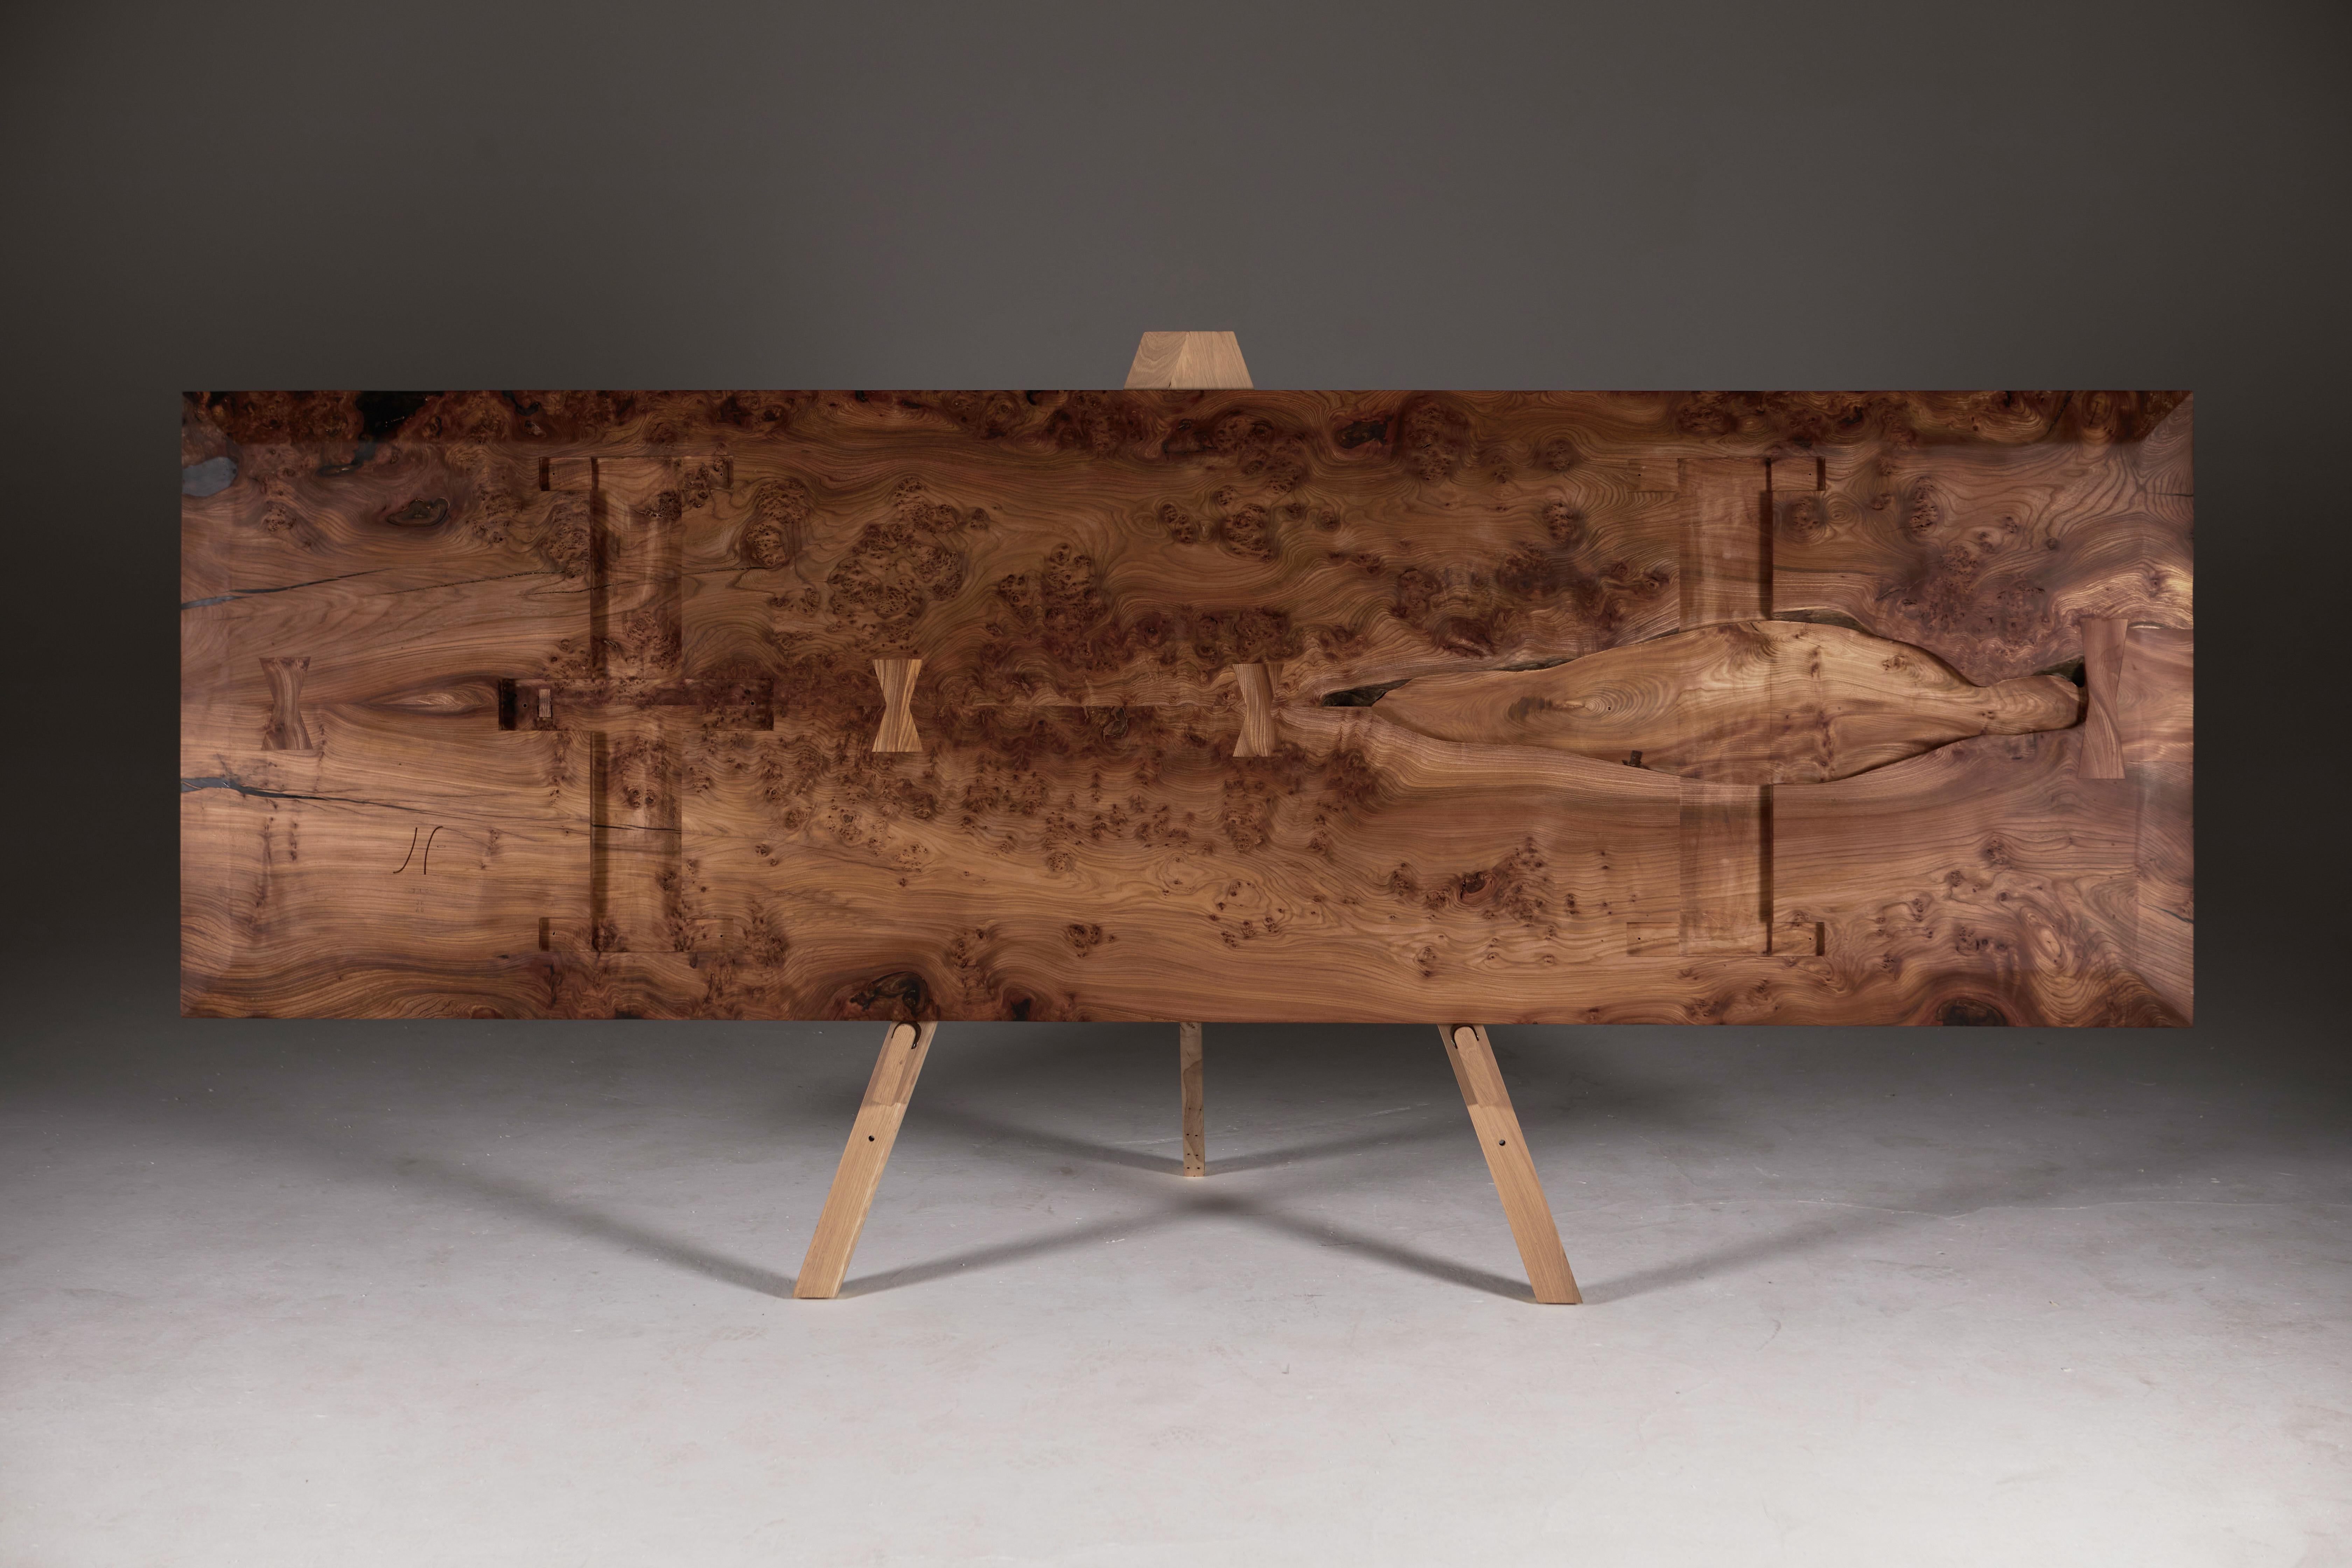 Scottish Burr Elm Table with Inverted Live Edge Legs and Book-matched Top.  10